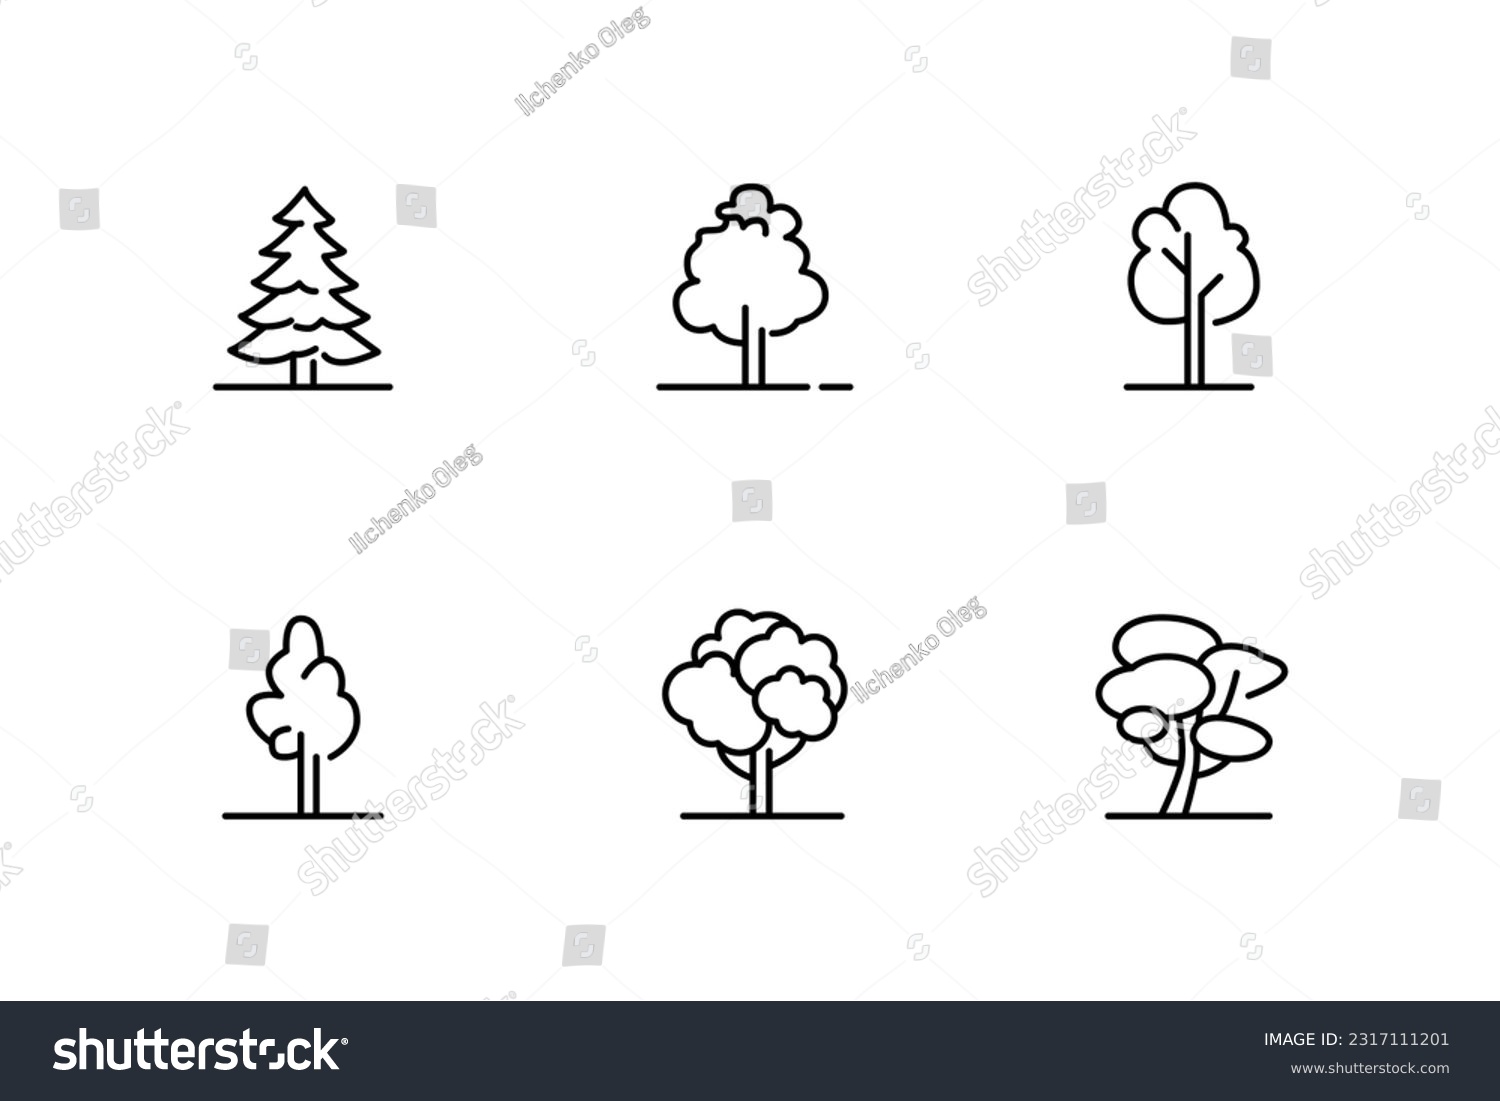 SVG of Thin line trees icons set. Forest, park and garden trees isolated signs. The concept of nature. Vector illustration symbol elements for web design and apps. svg